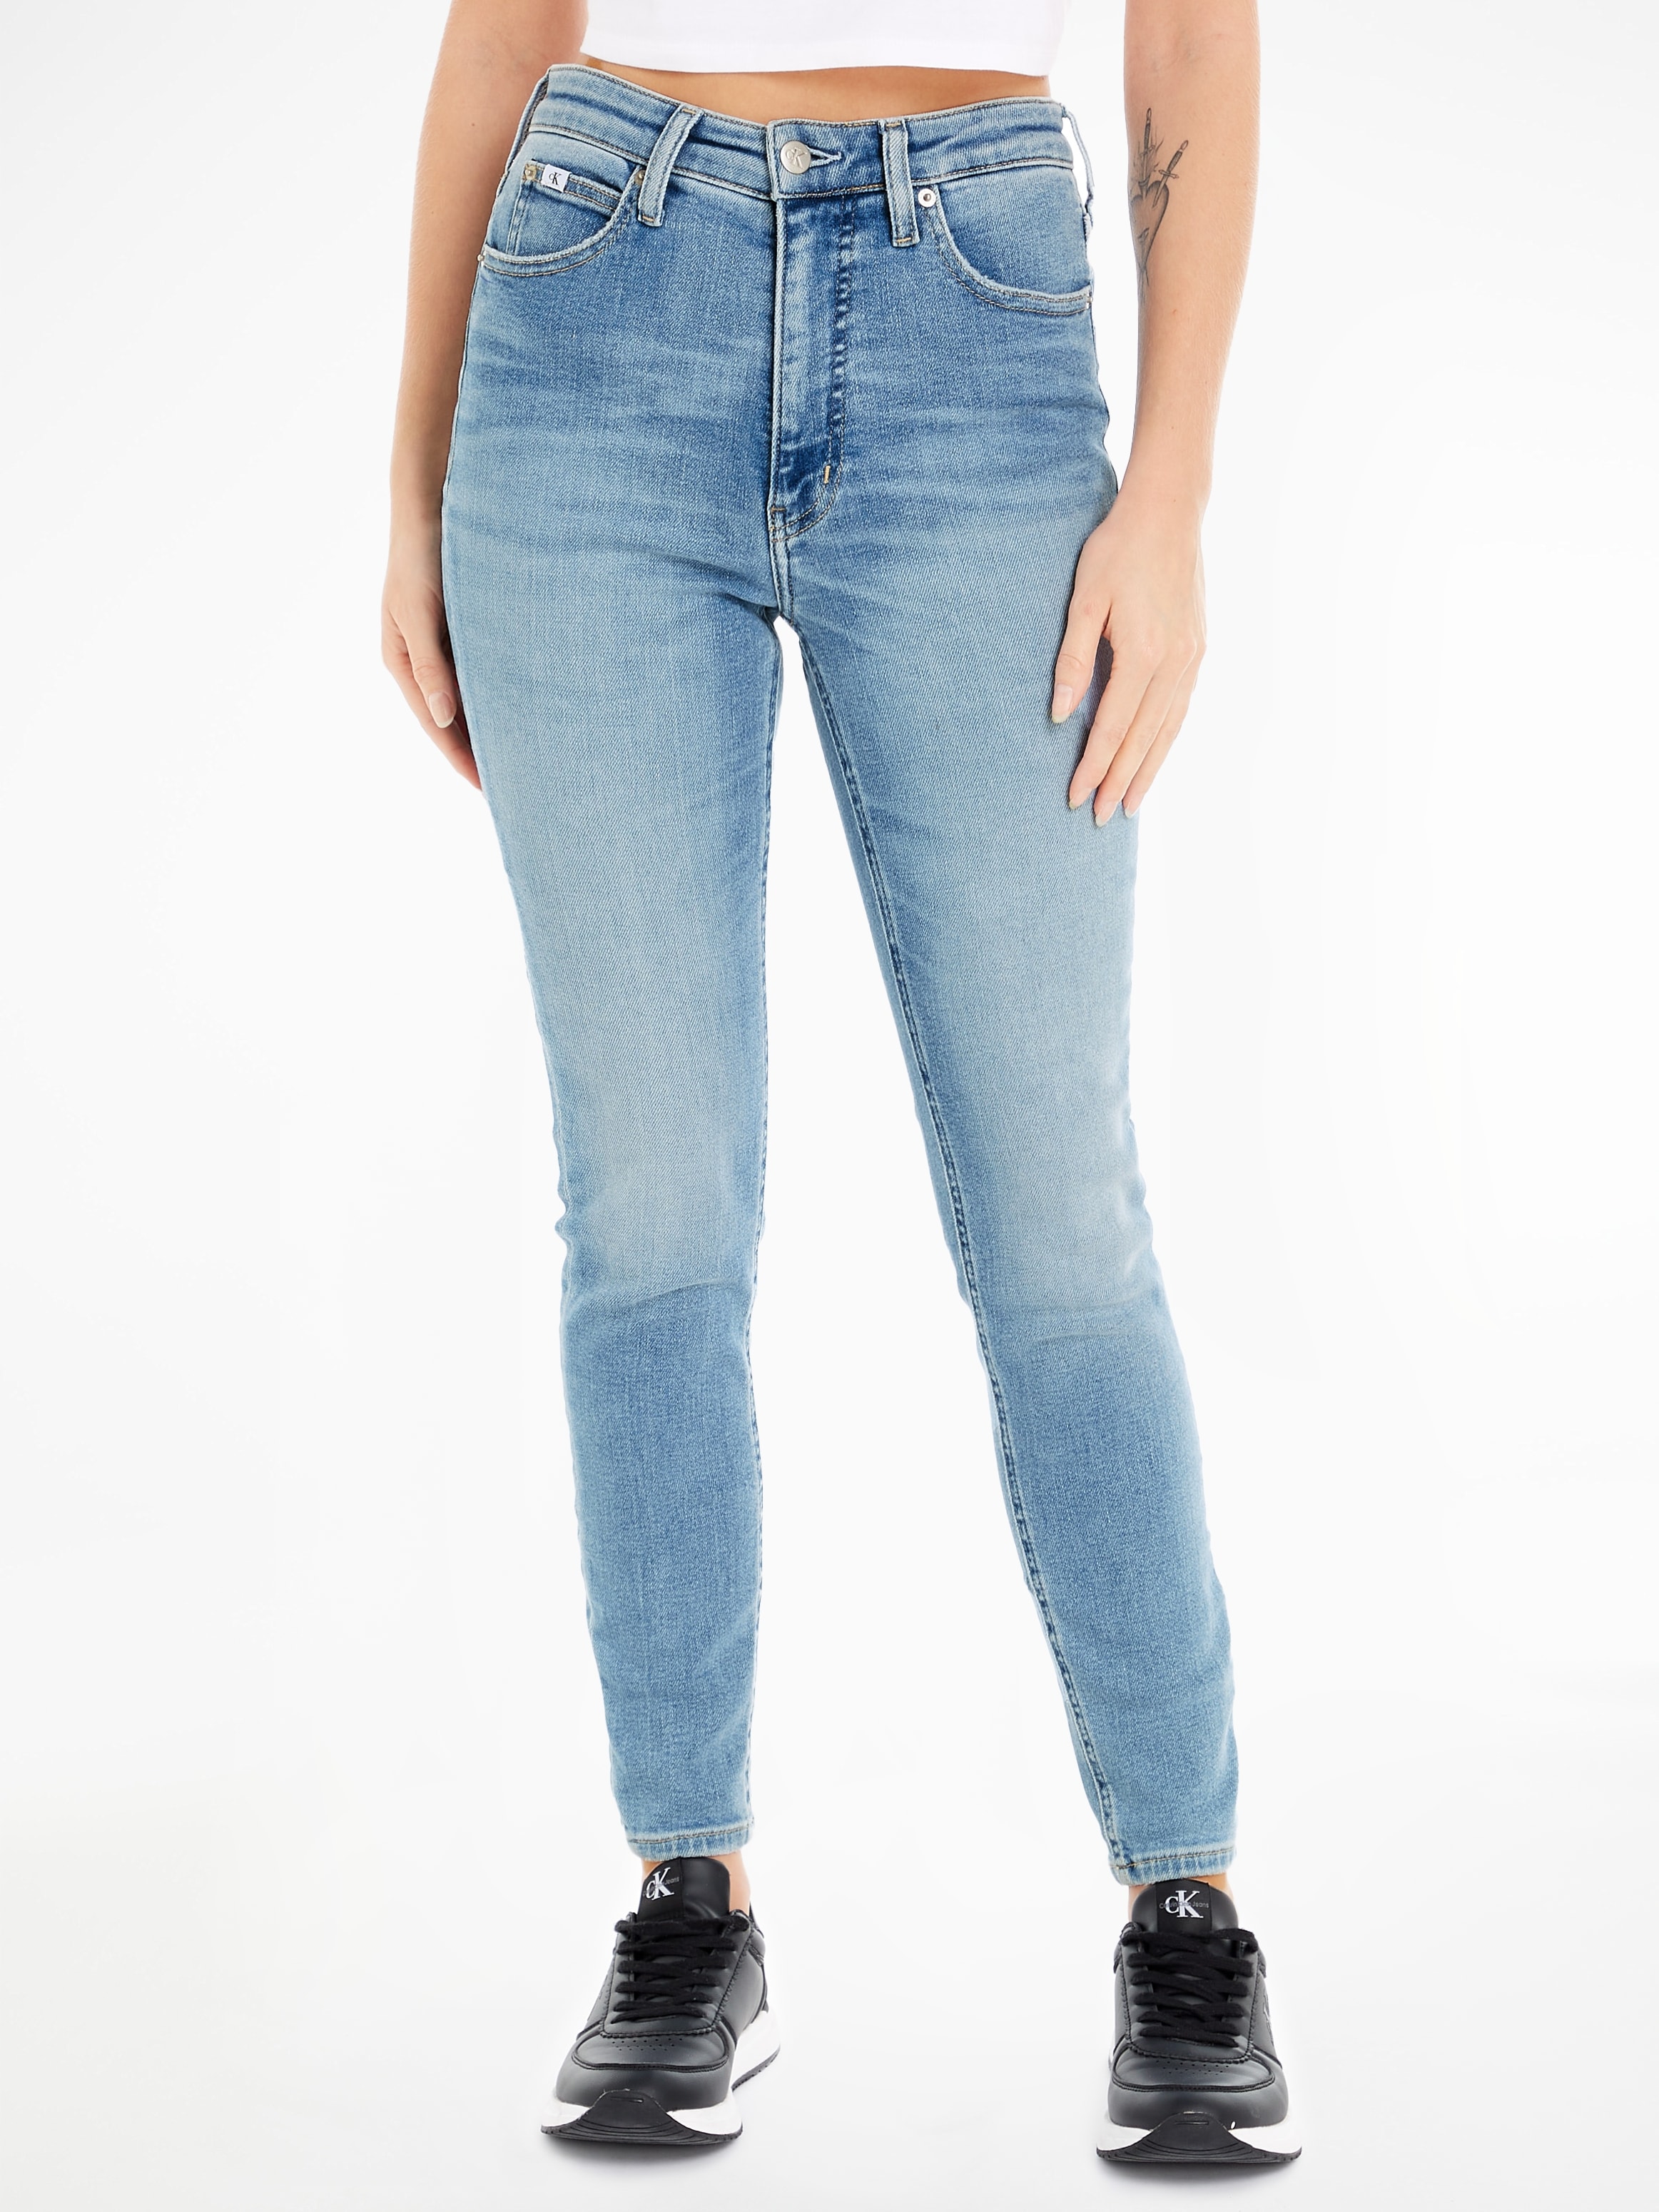 RISE Jeans Skinny-fit-Jeans SUPER OTTO SKINNY »HIGH bei Calvin ANKLE« Klein